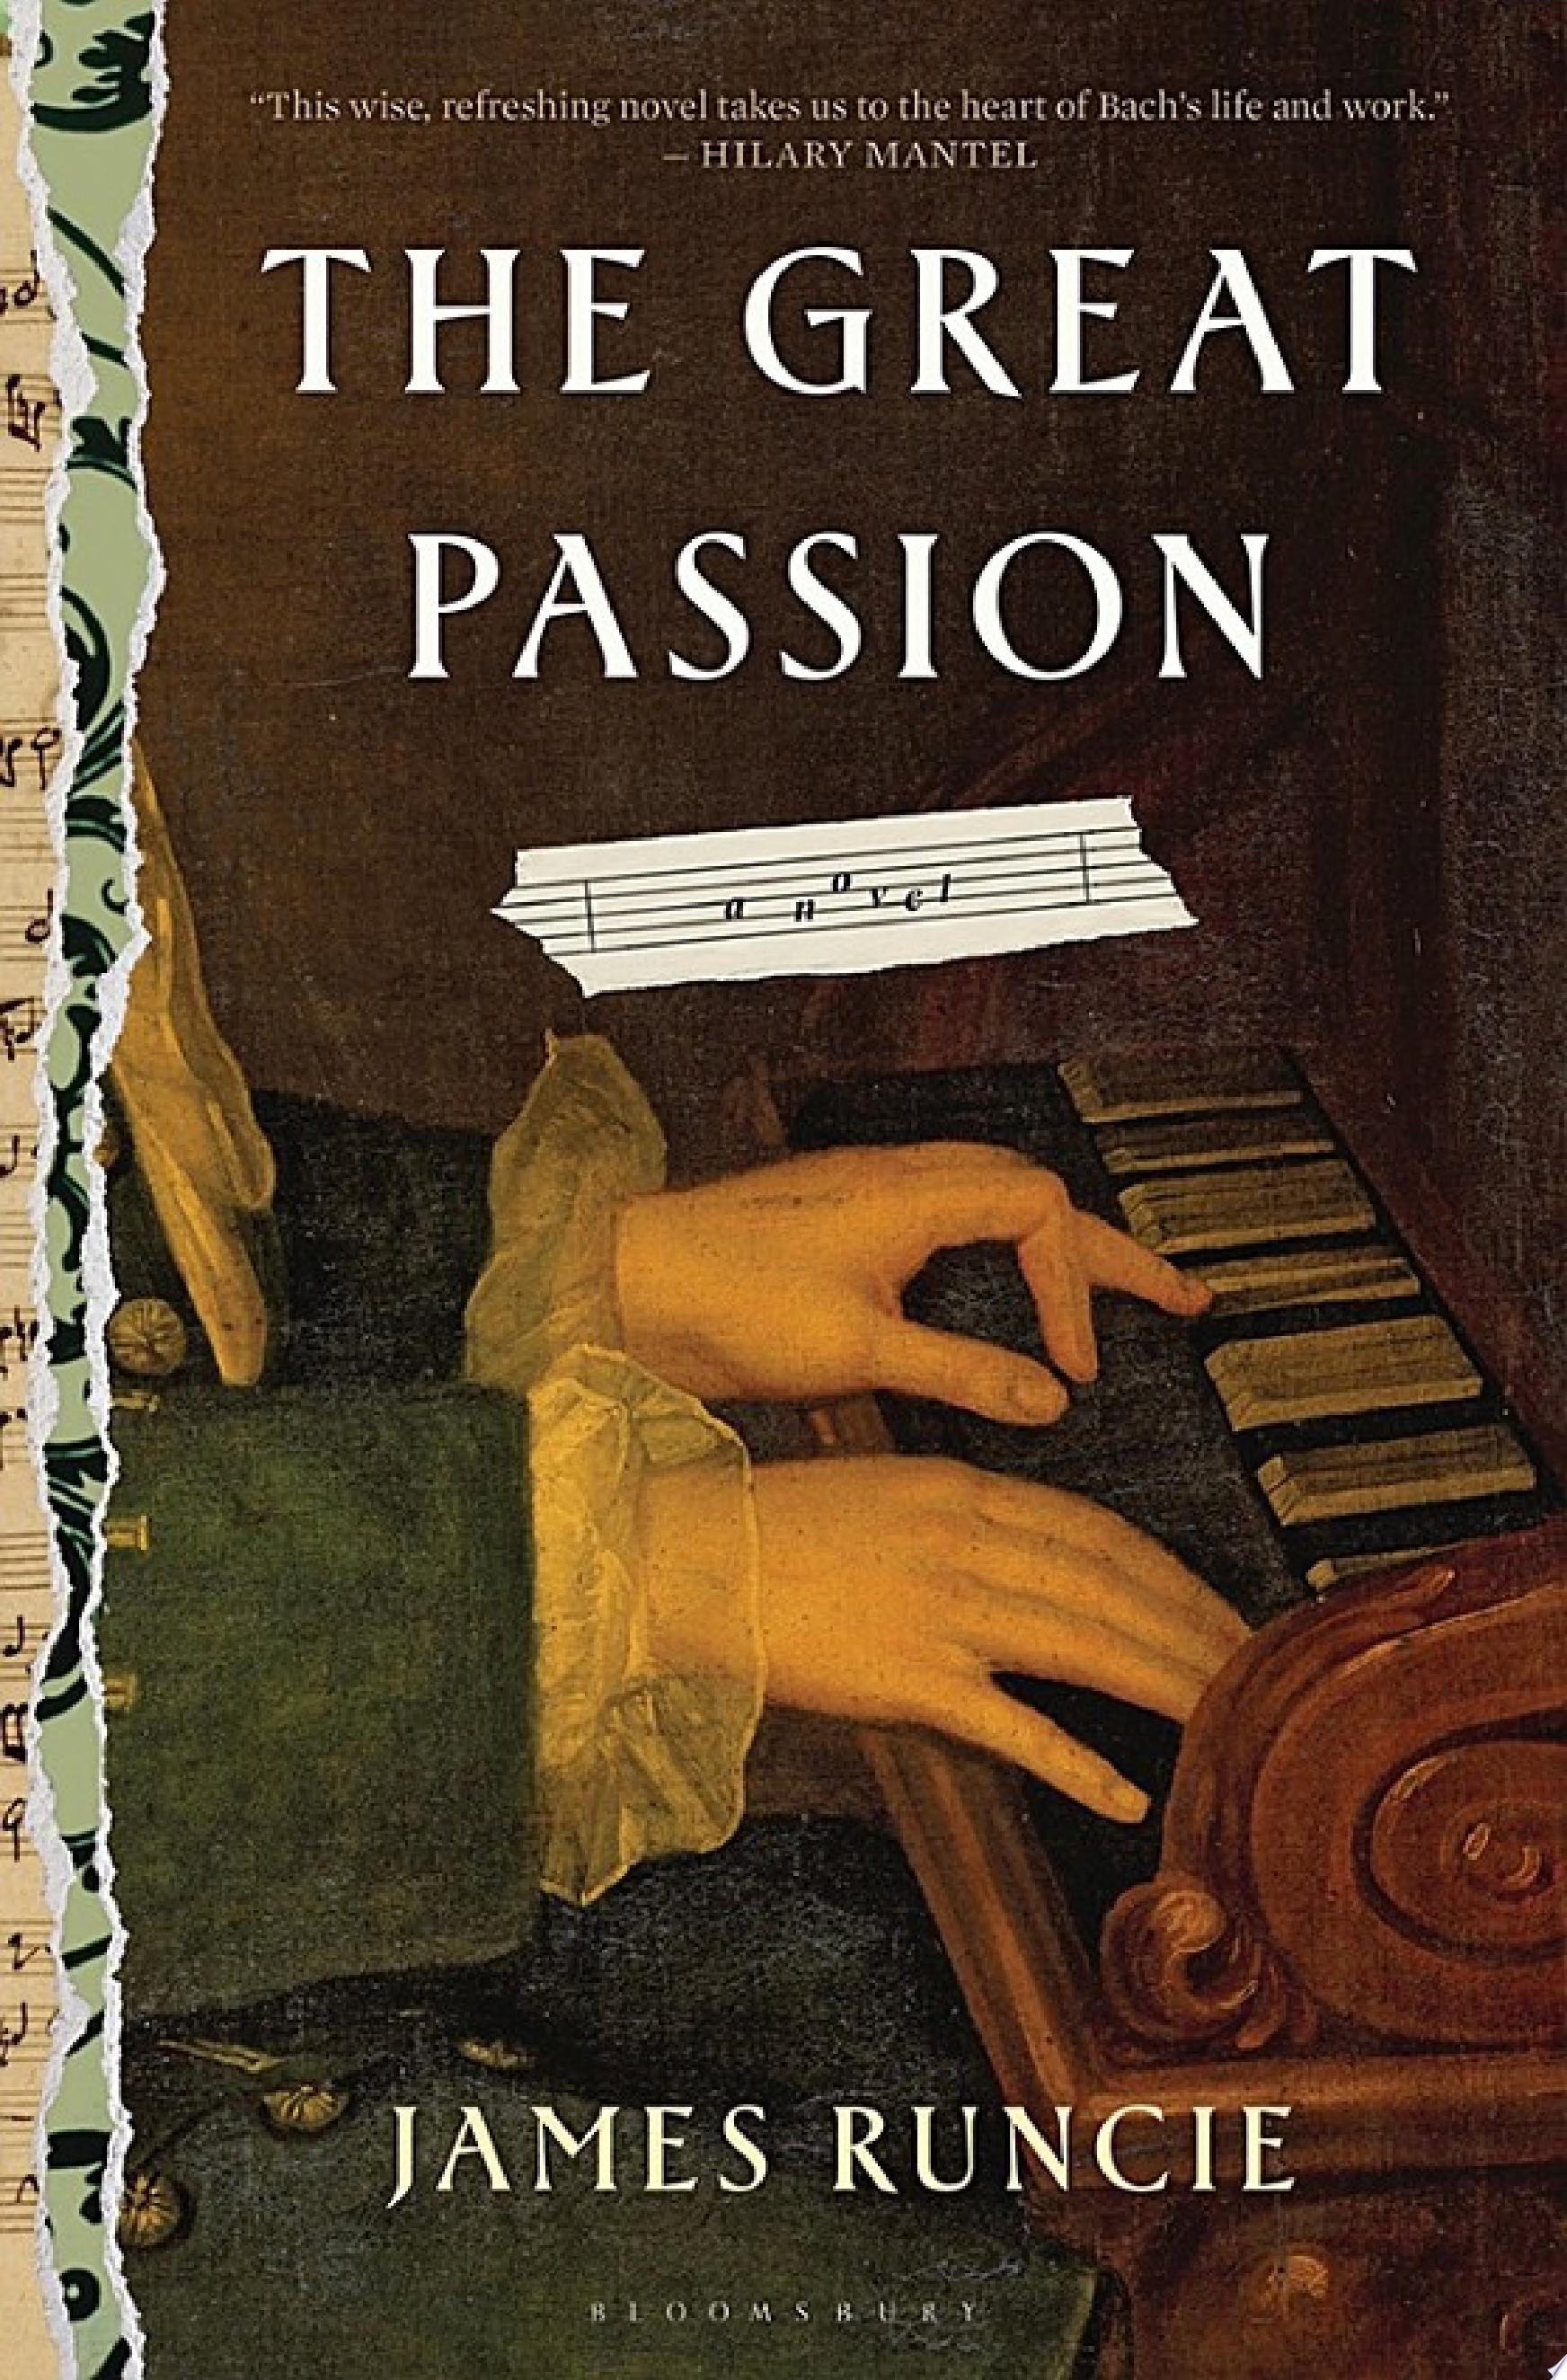 Image for "The Great Passion"